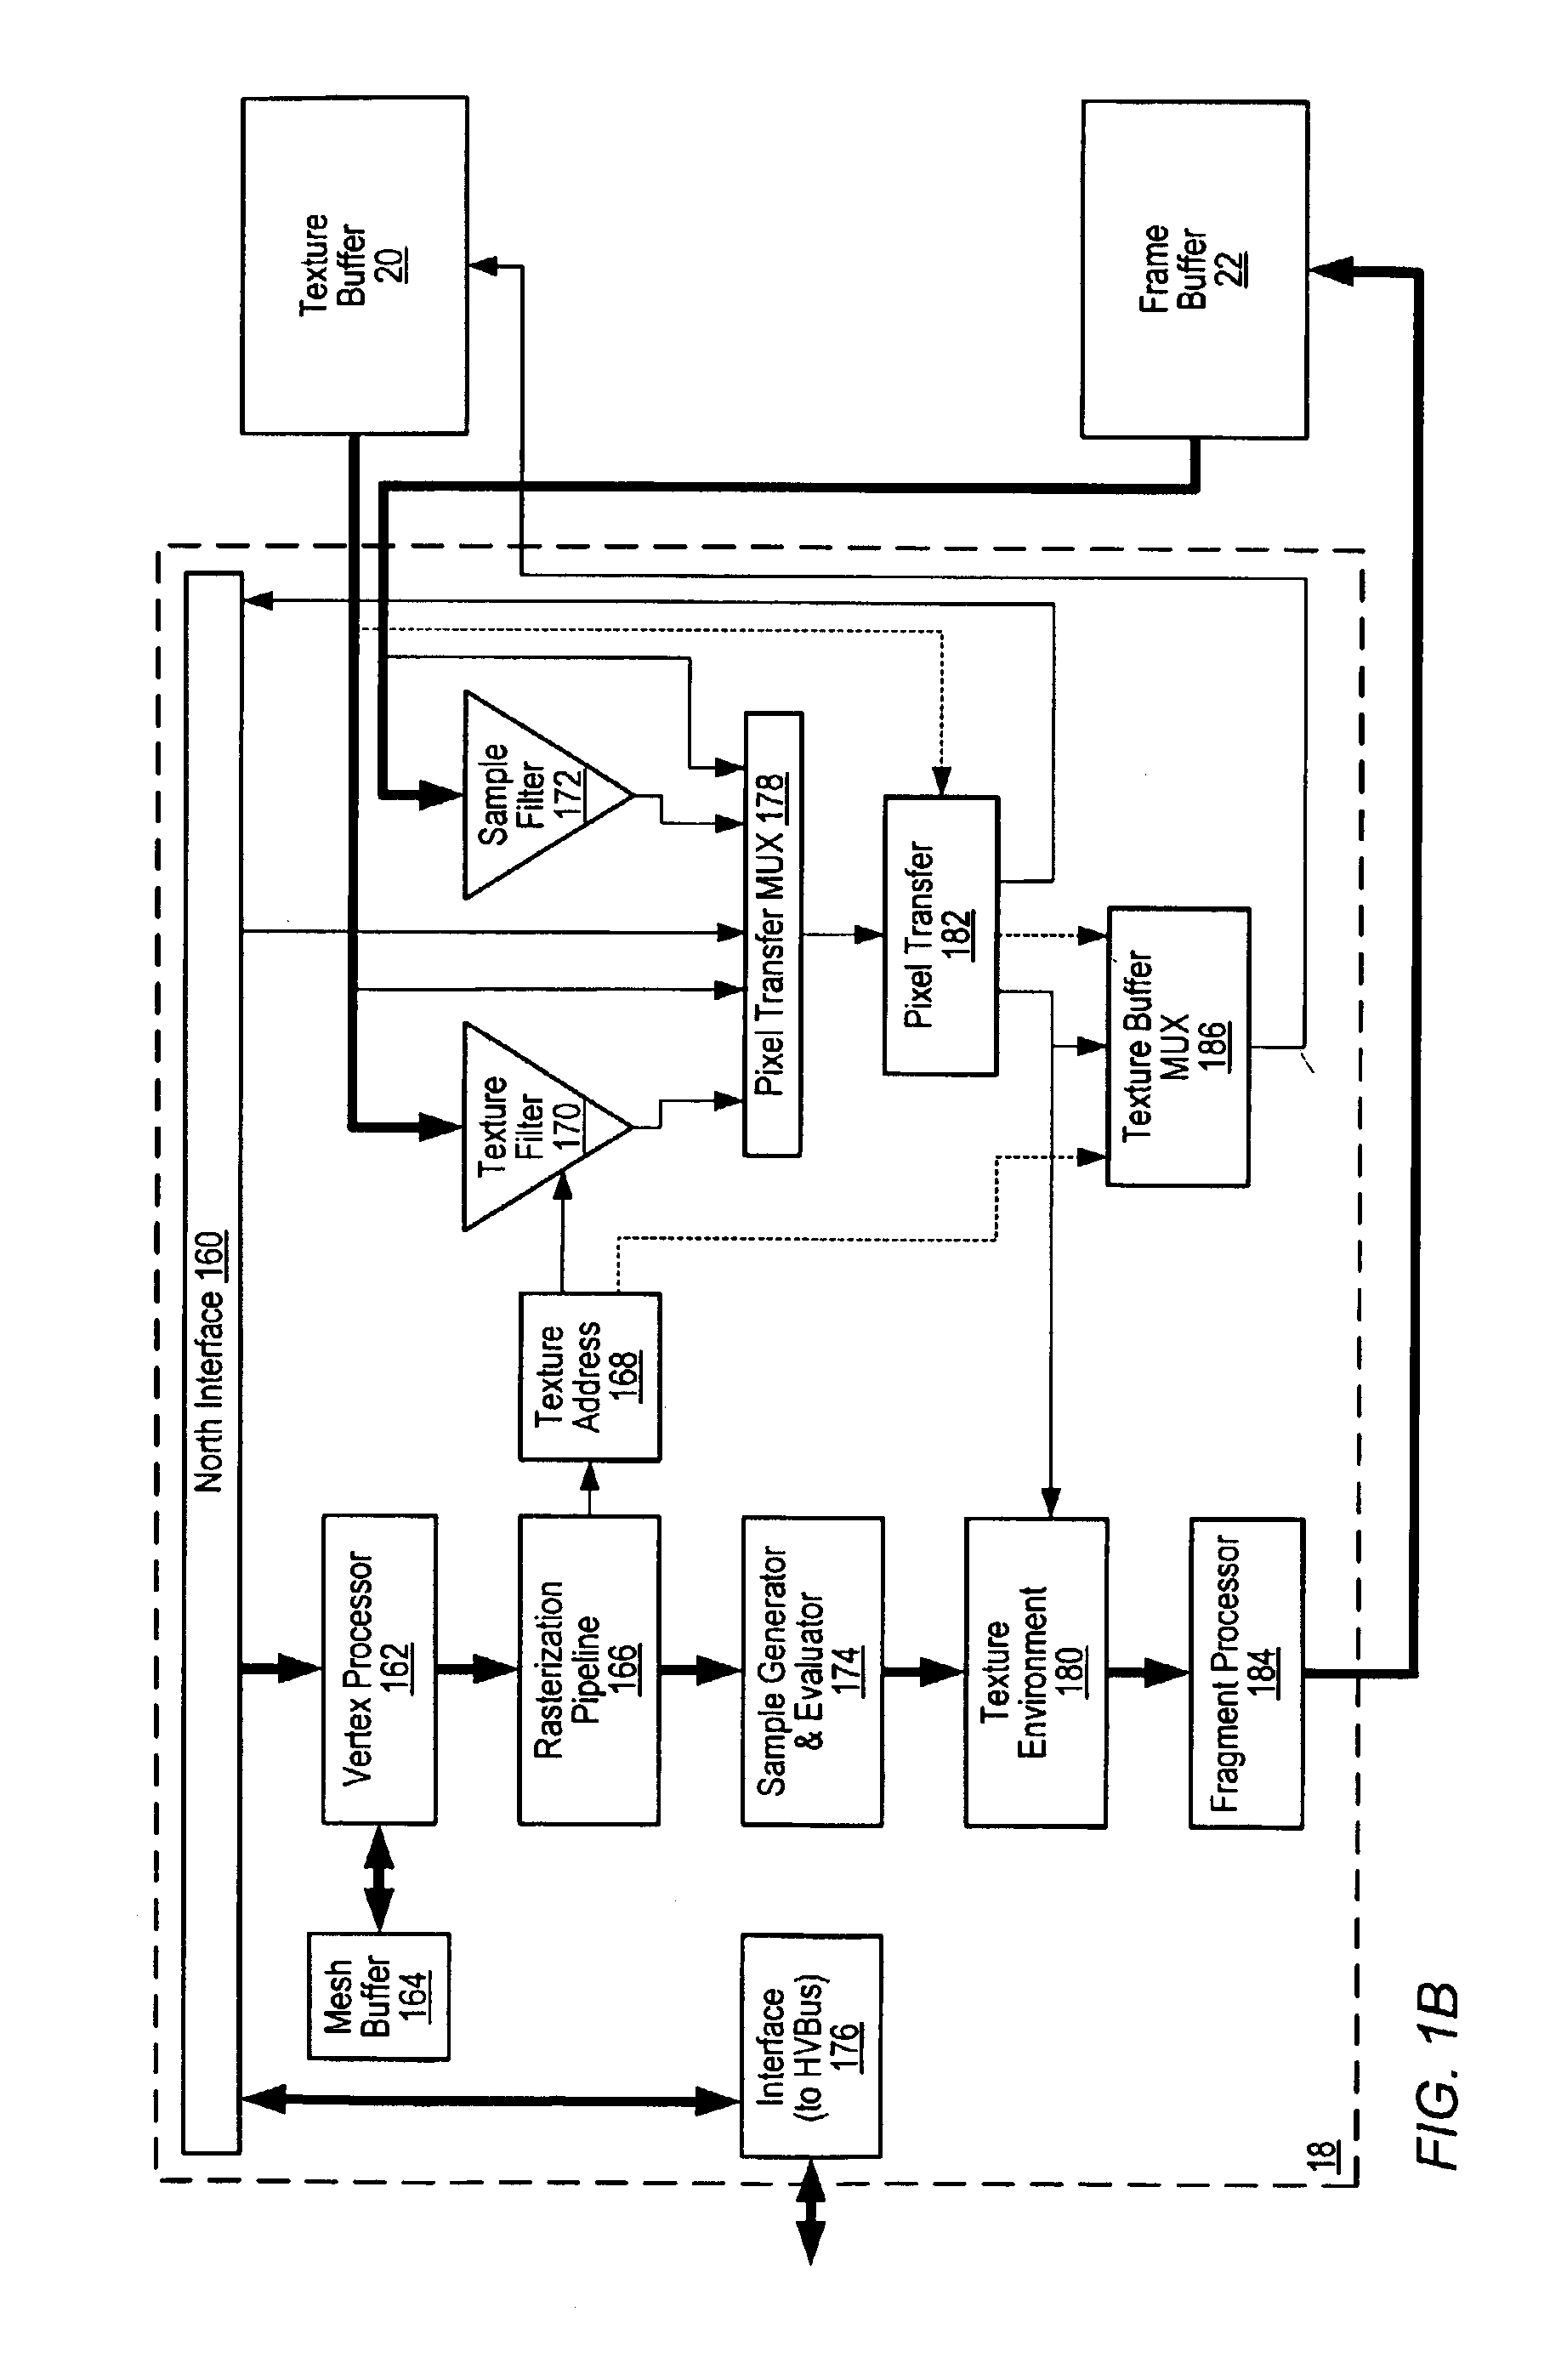 Dynamically adjusting sample density in a graphics system